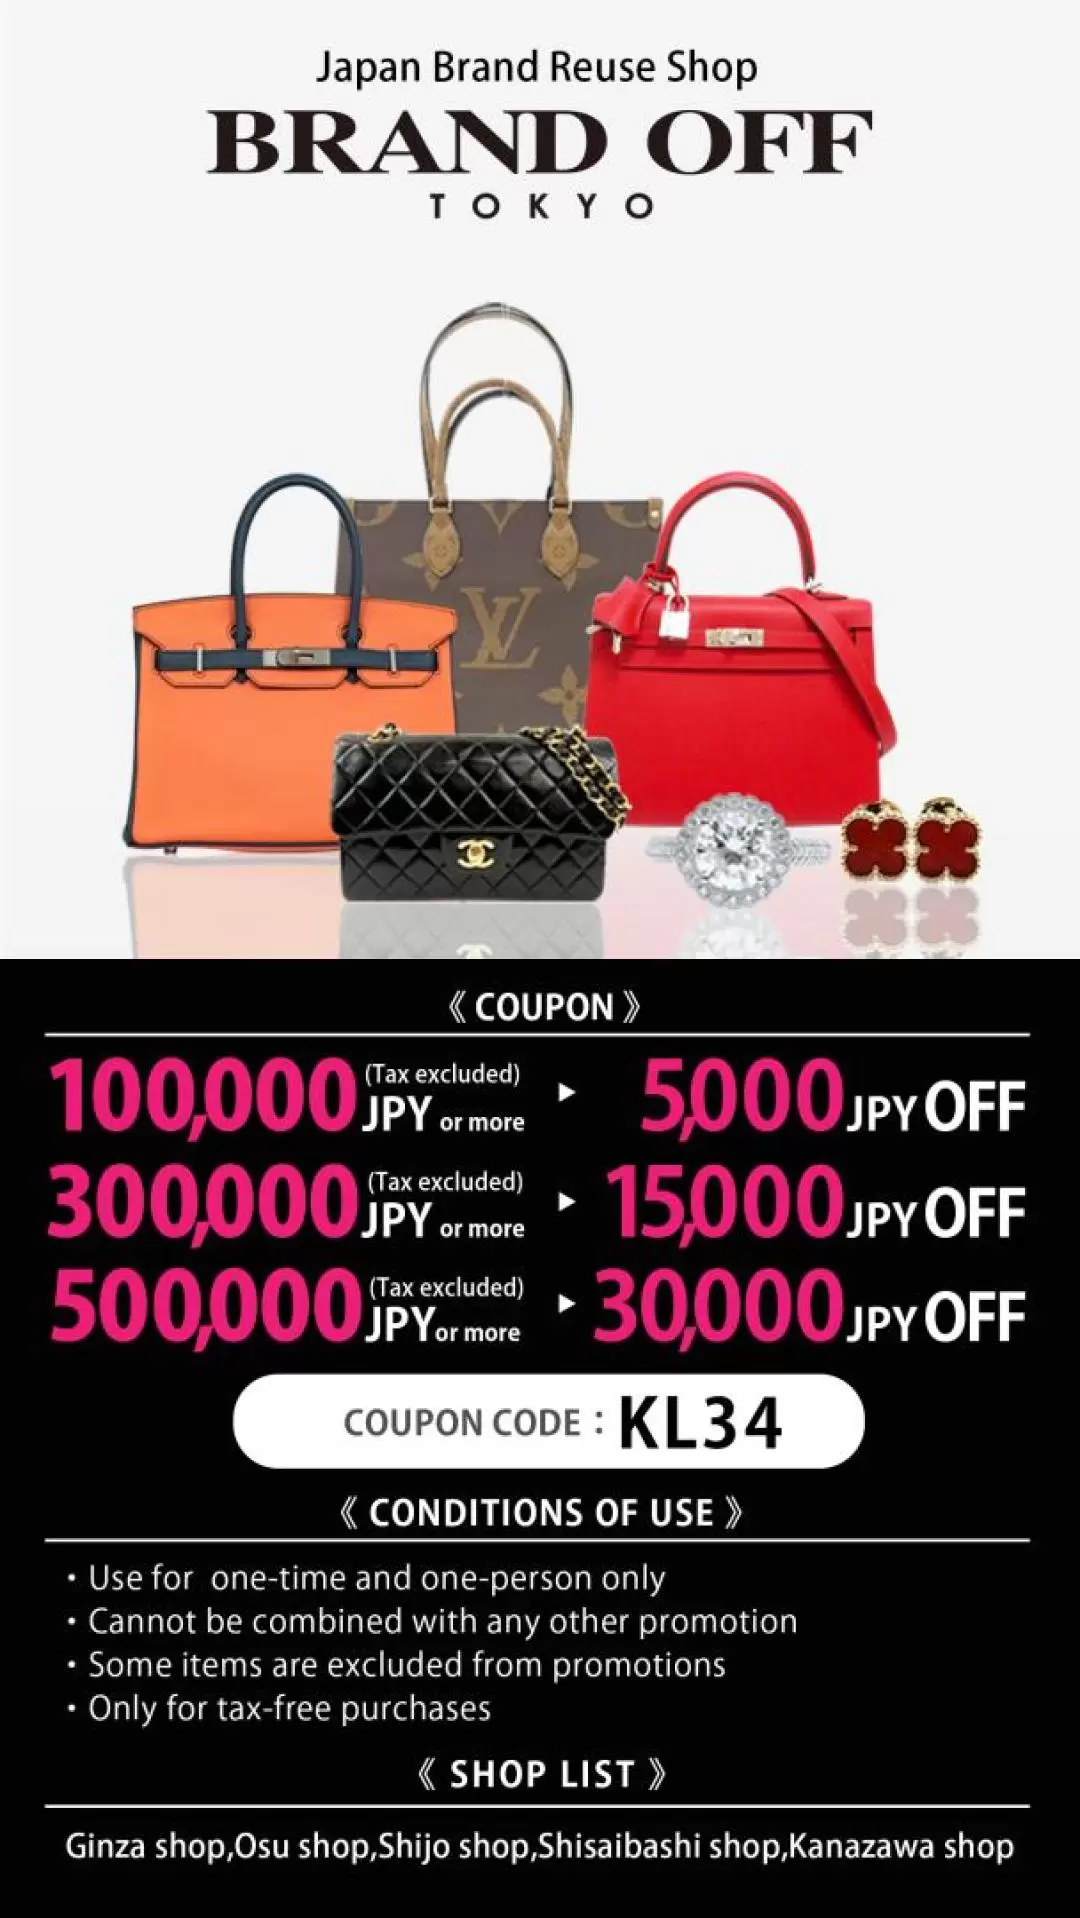 BRANDOFF Tourist Privilege Discount Coupon for Second-hand Luxury Goods